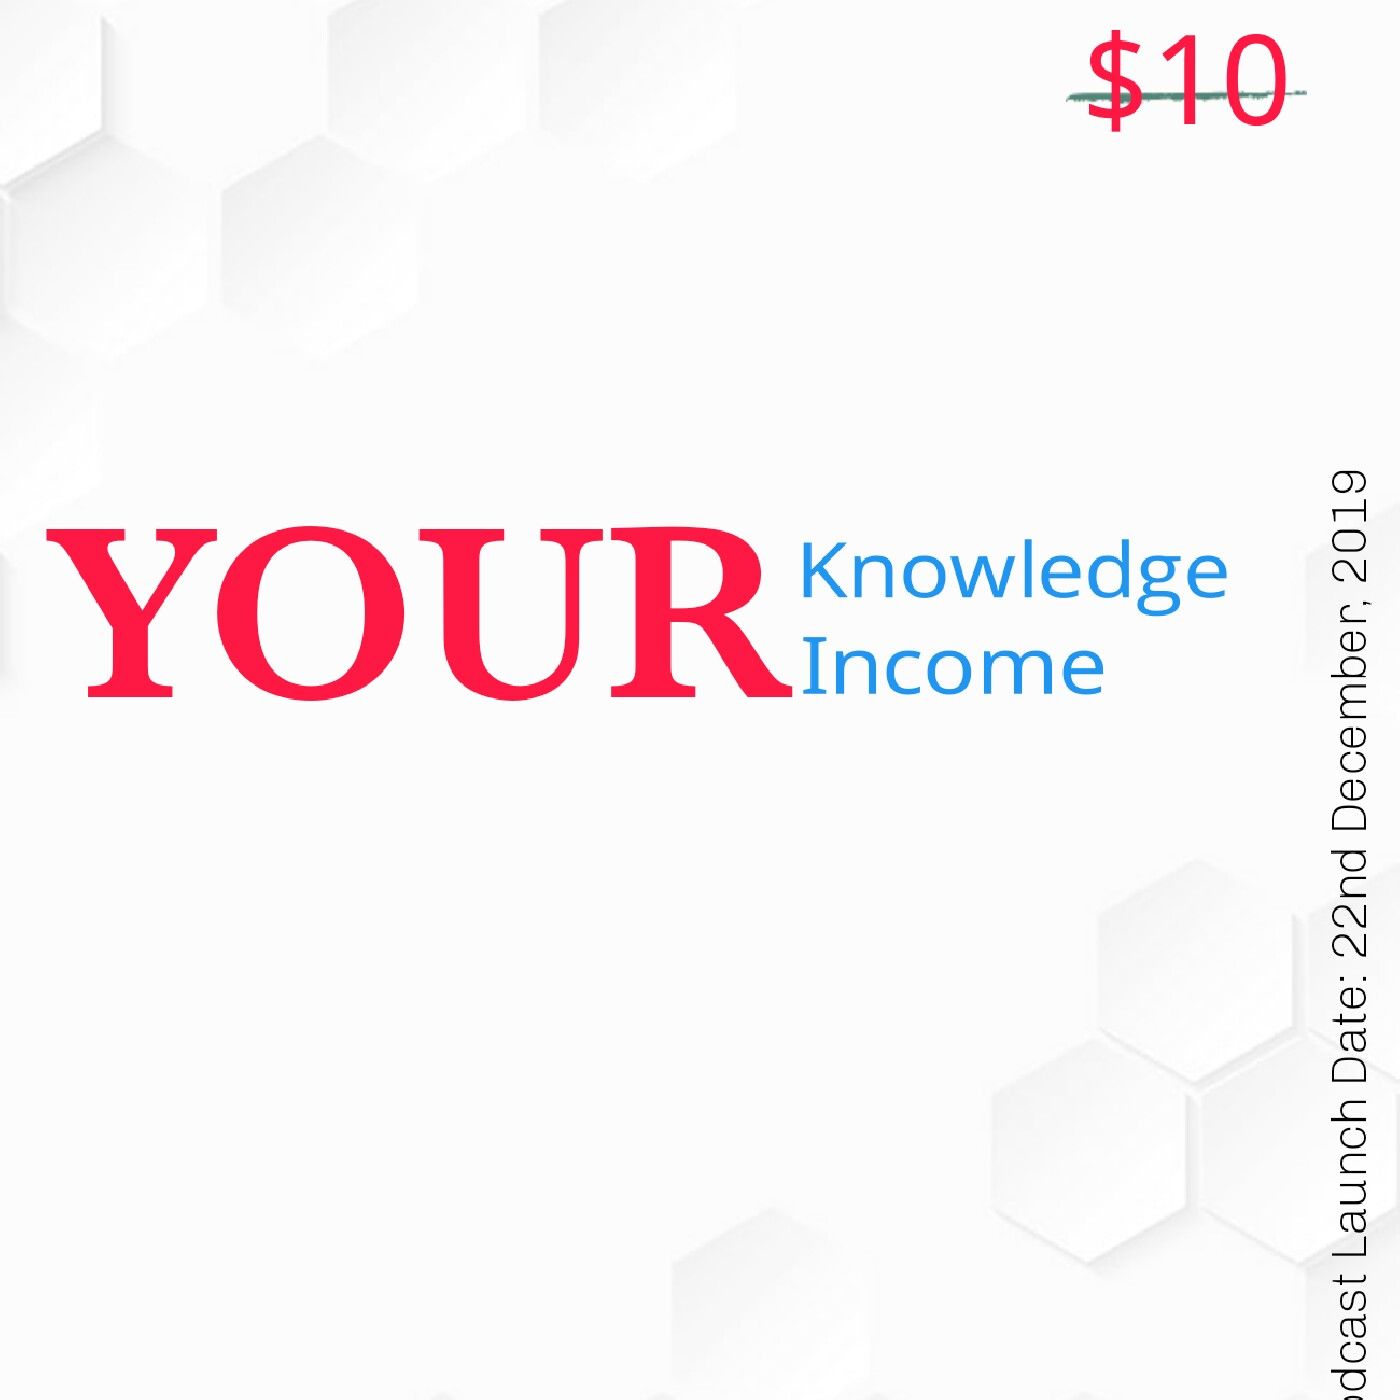 Episode 2 - Your Knowledge, Your Income